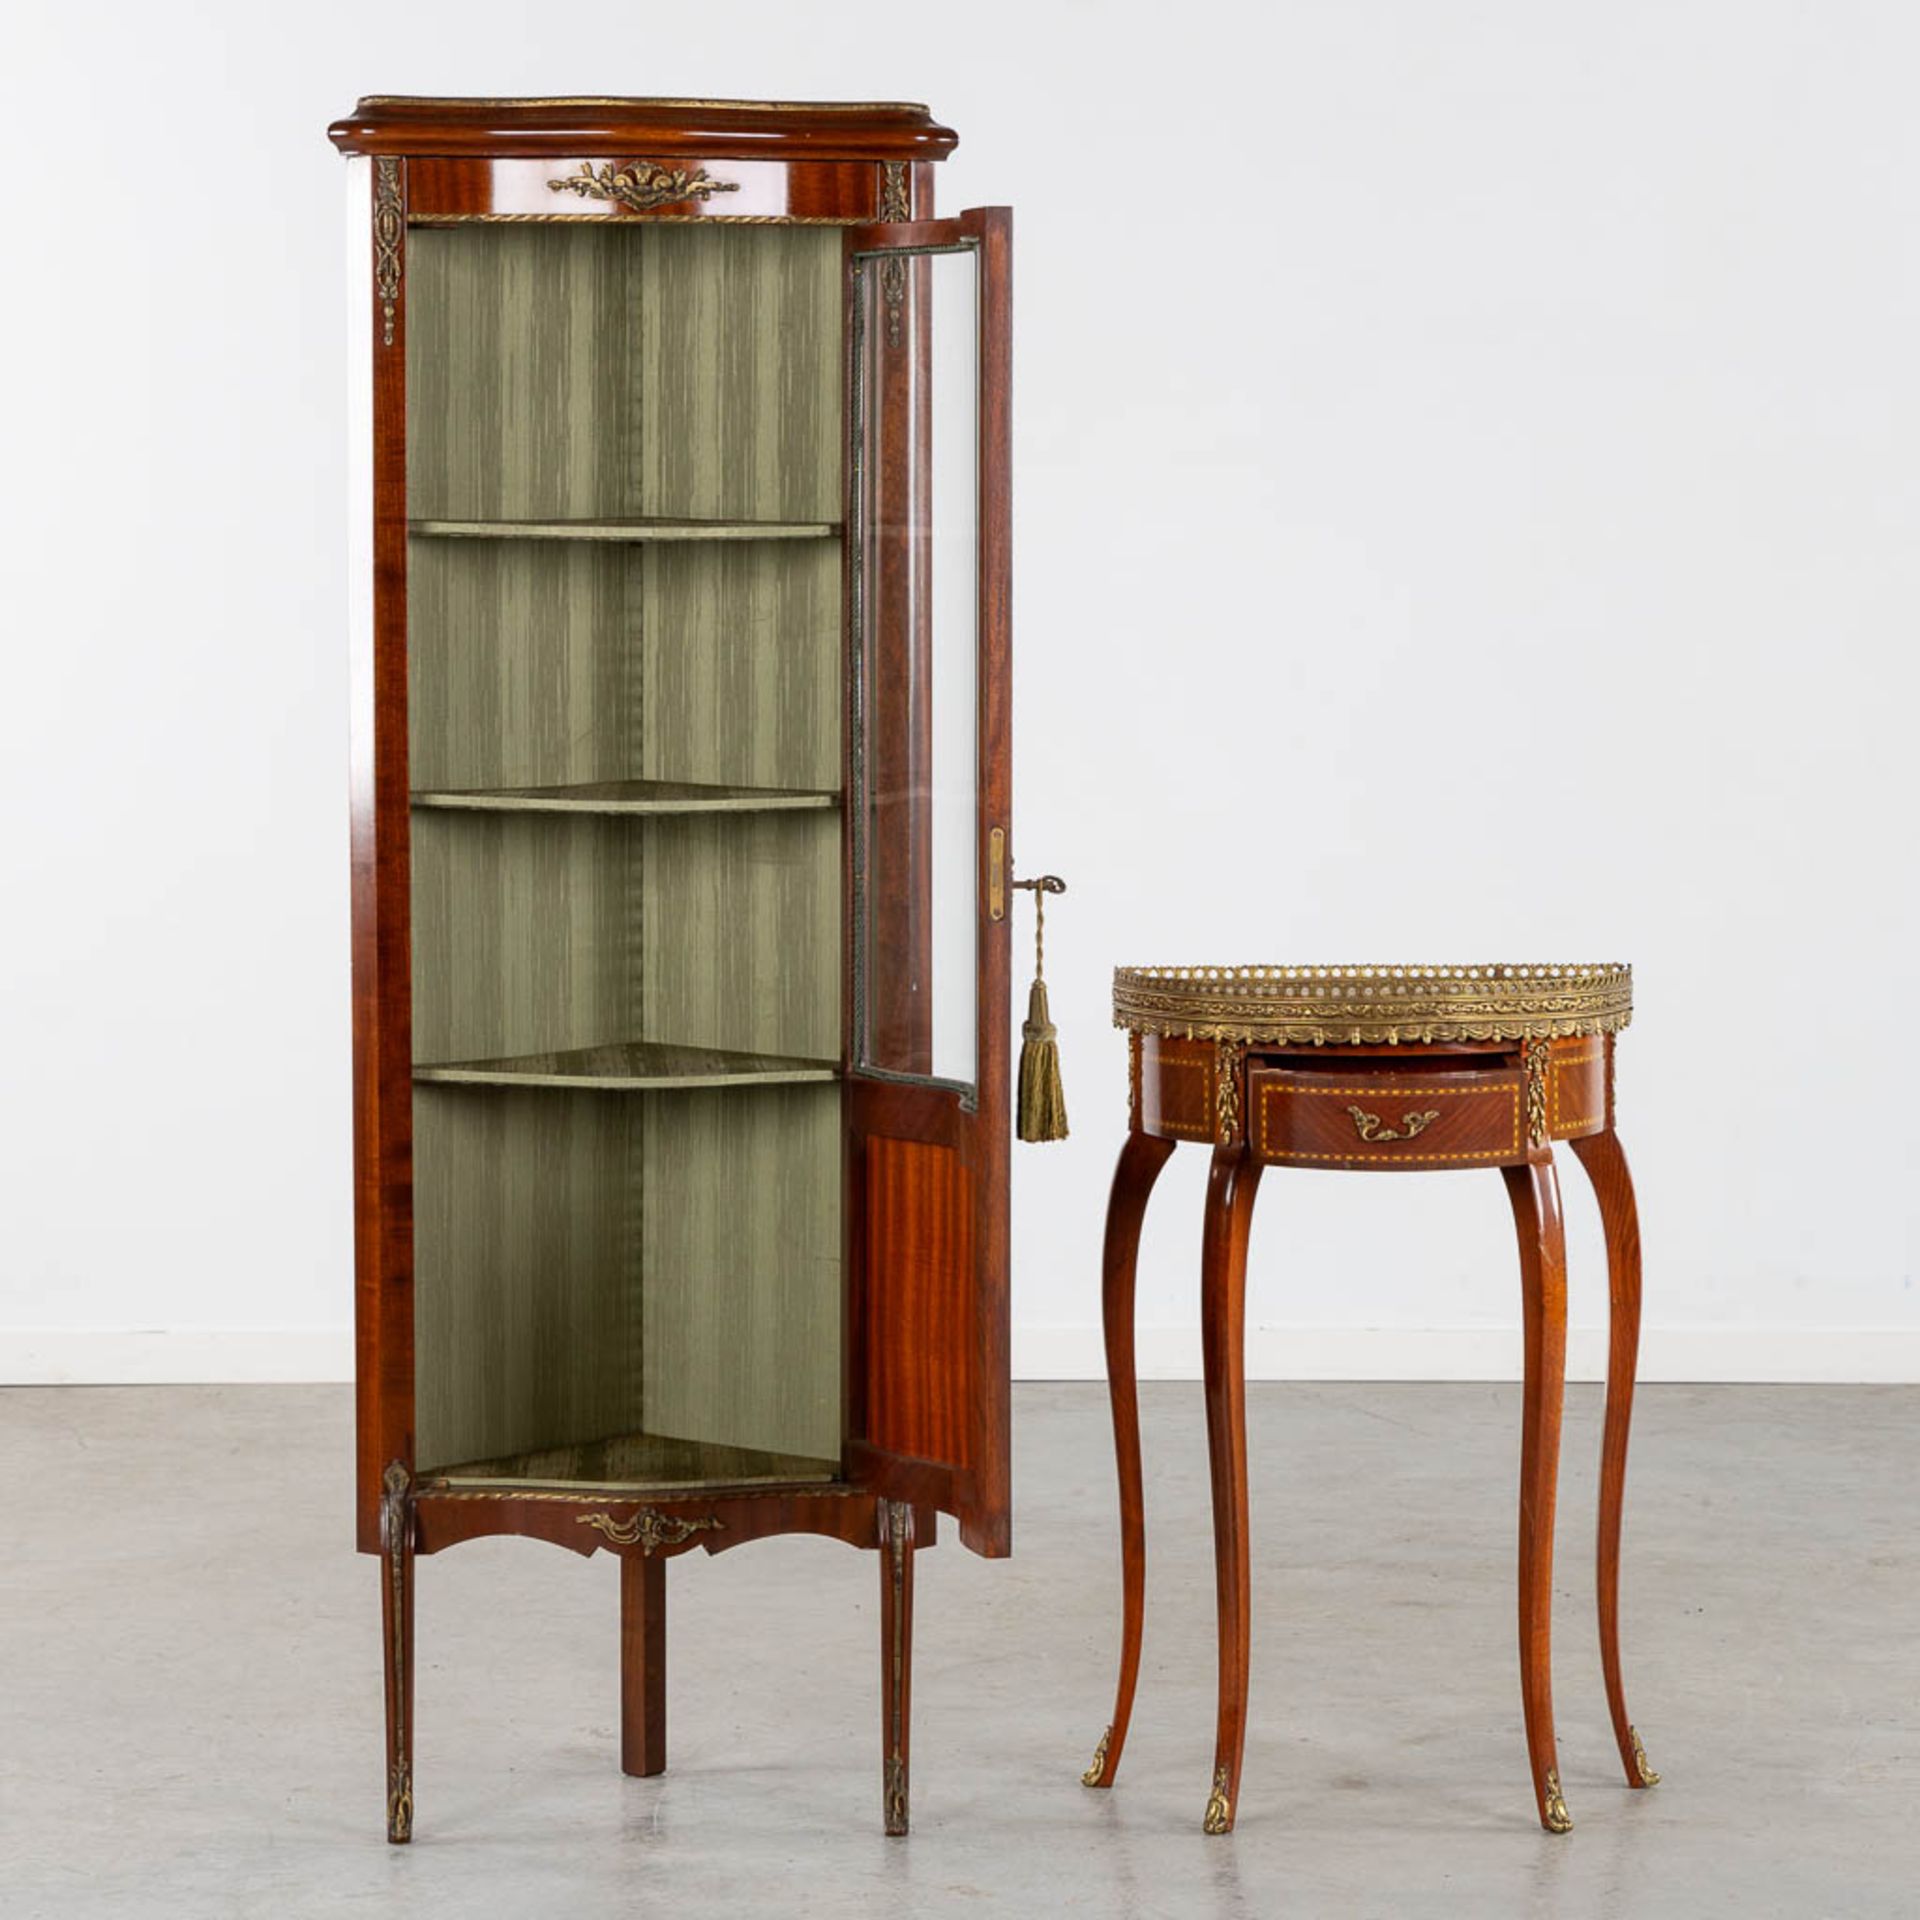 A corner cabinet and console table, marquetry mounted with bronze. 20th C. (L:34 x W:54 x H:150 cm) - Image 3 of 10